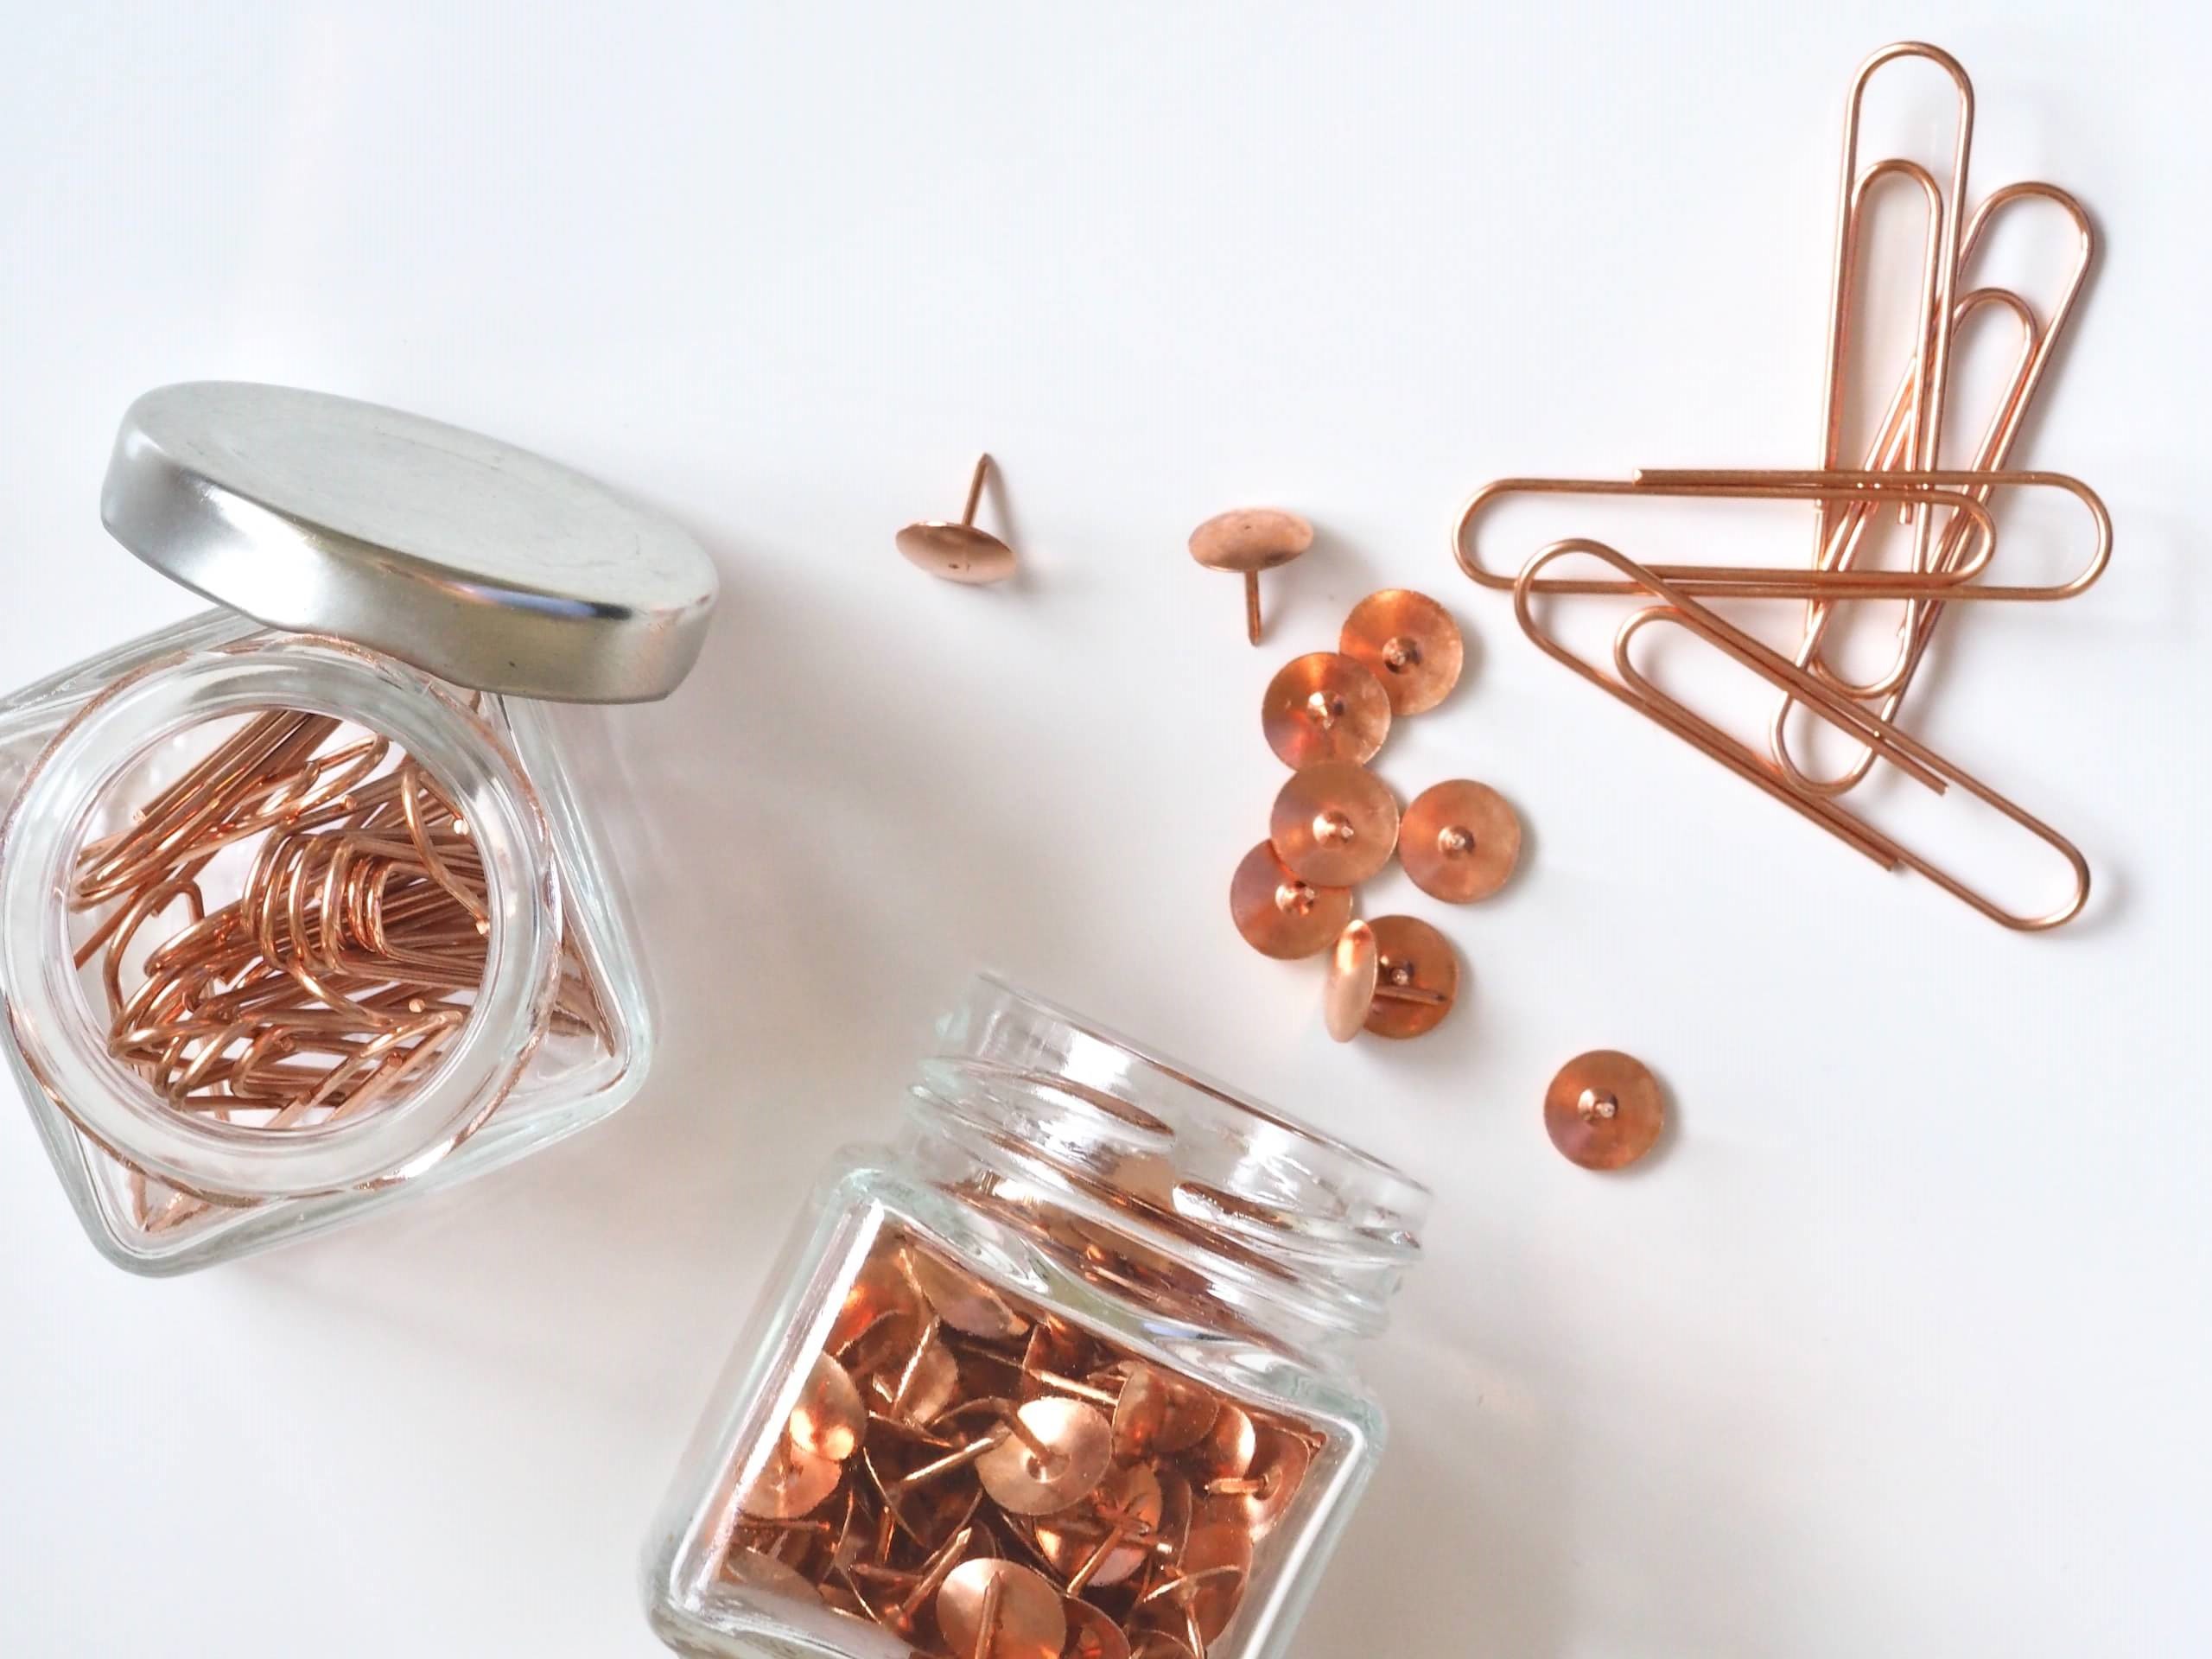 What affects the price of copper?